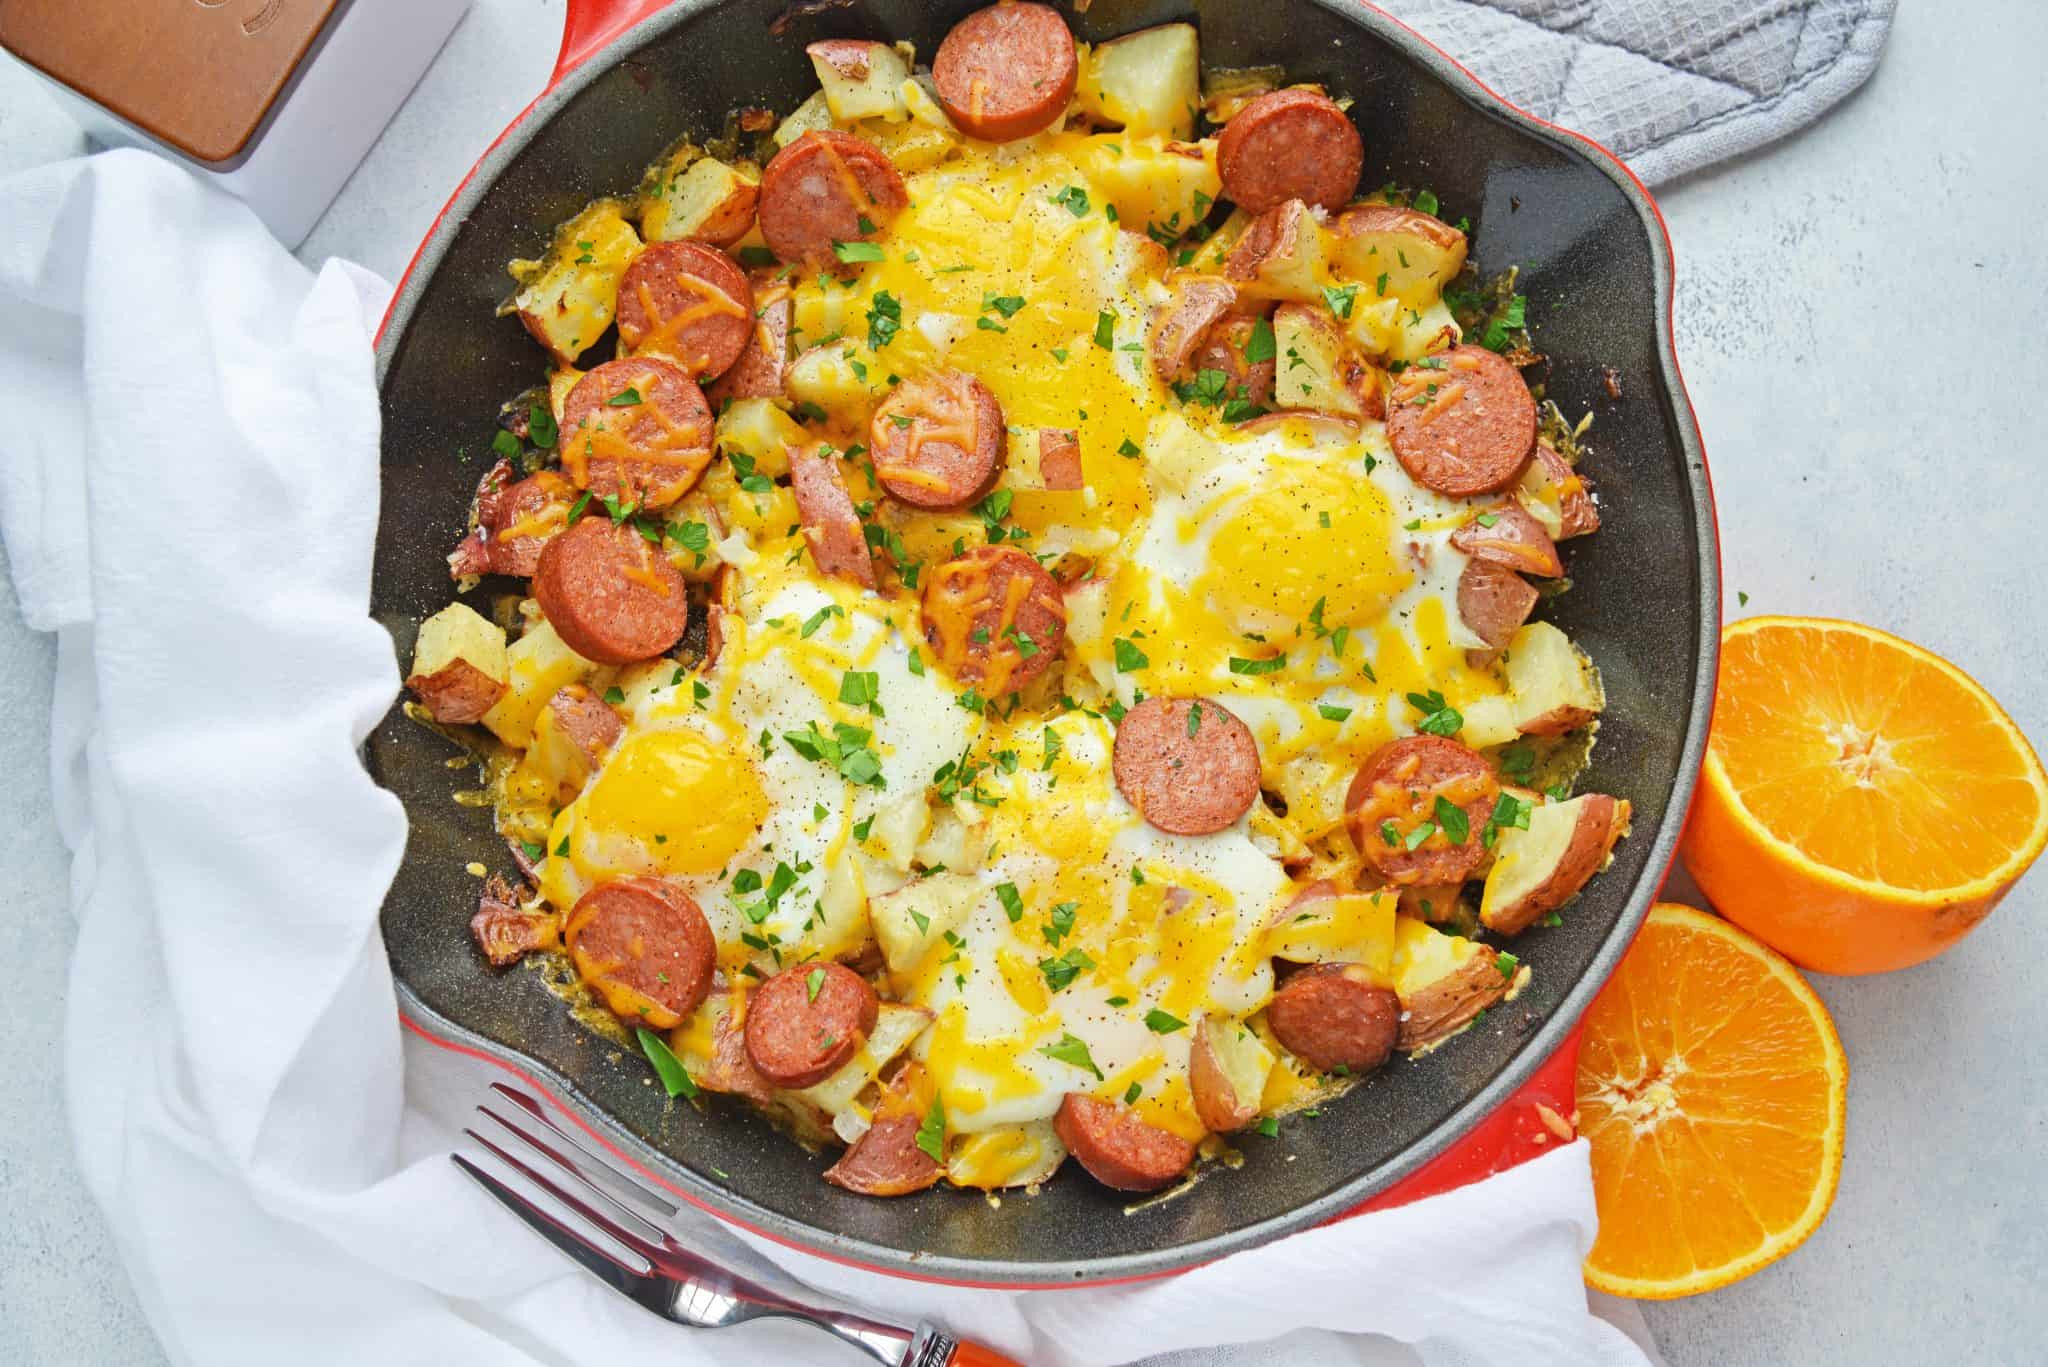 15 Of the Best Ideas for Breakfast Recipes with Sausage and Eggs